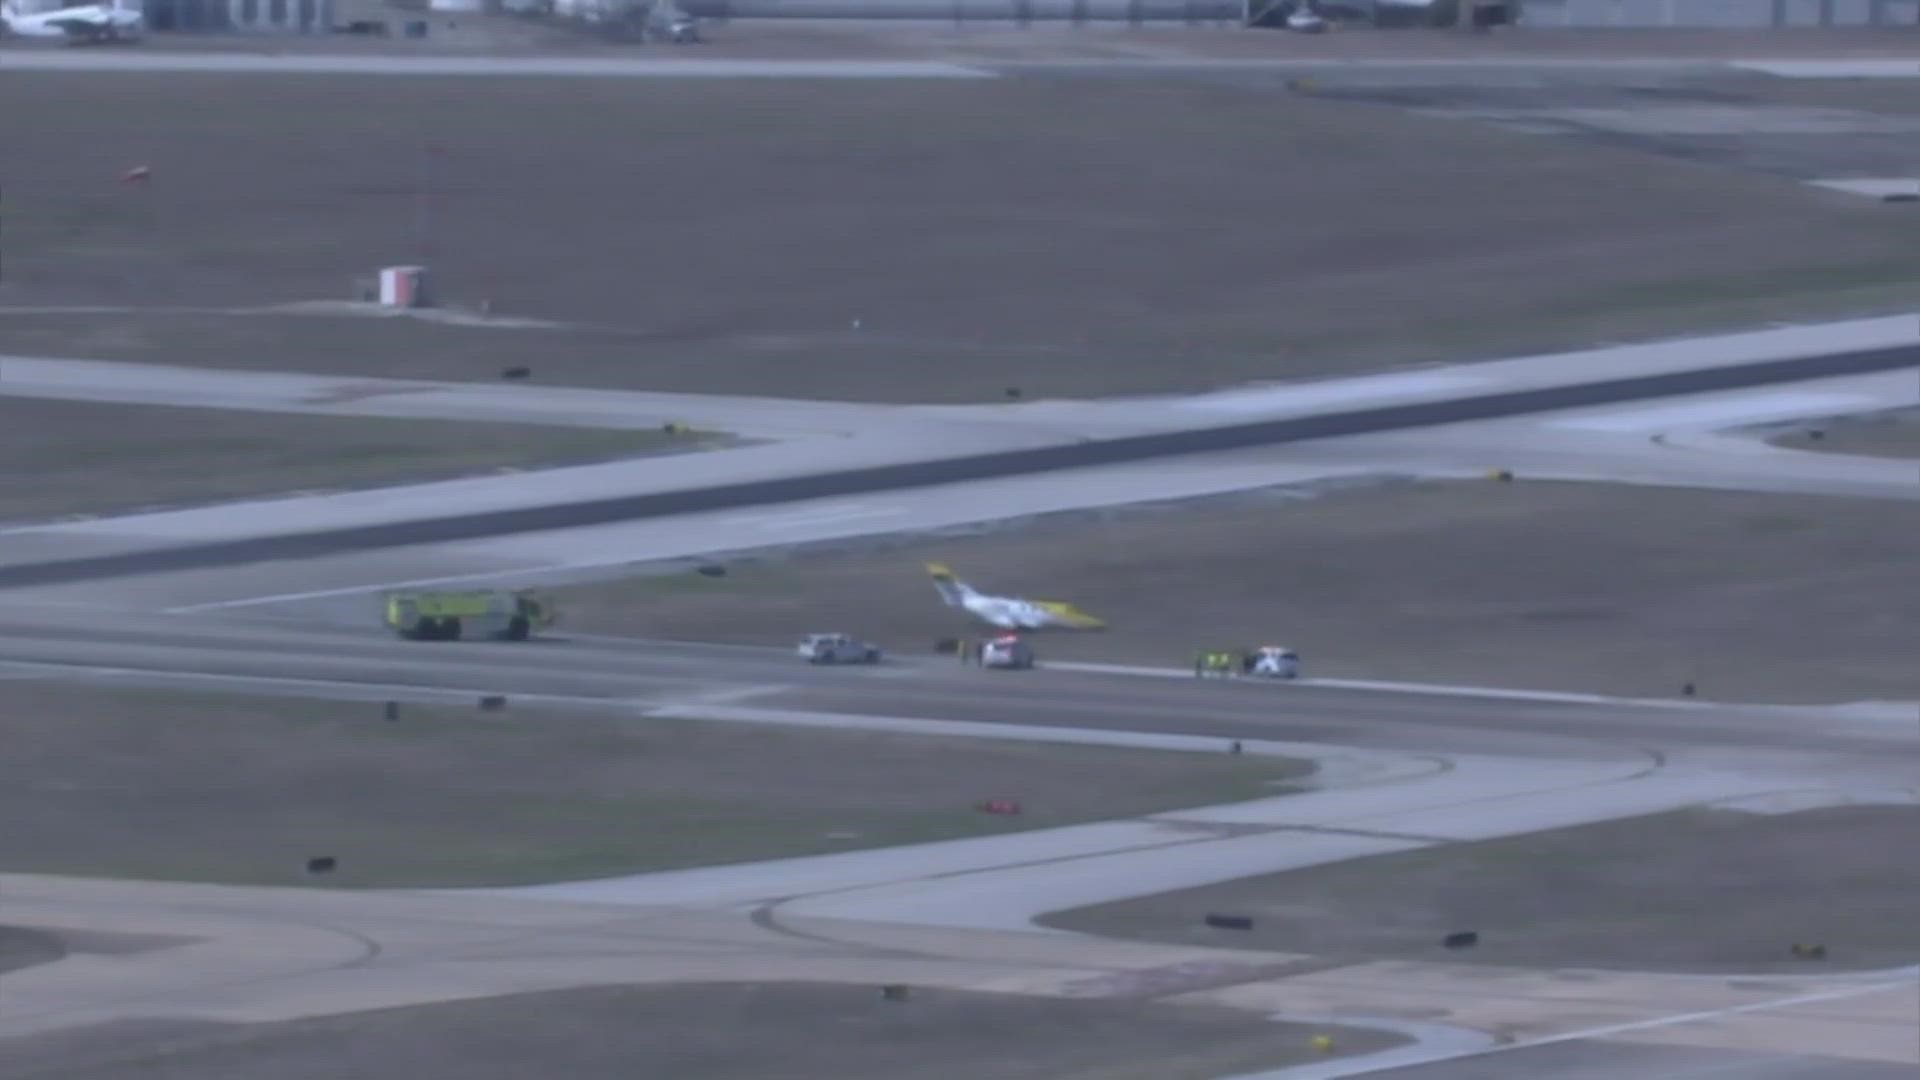 All inbound and outbound flights were grounded at Hobby Airport Friday, Feb. 17 after a small plane slid off the runway.